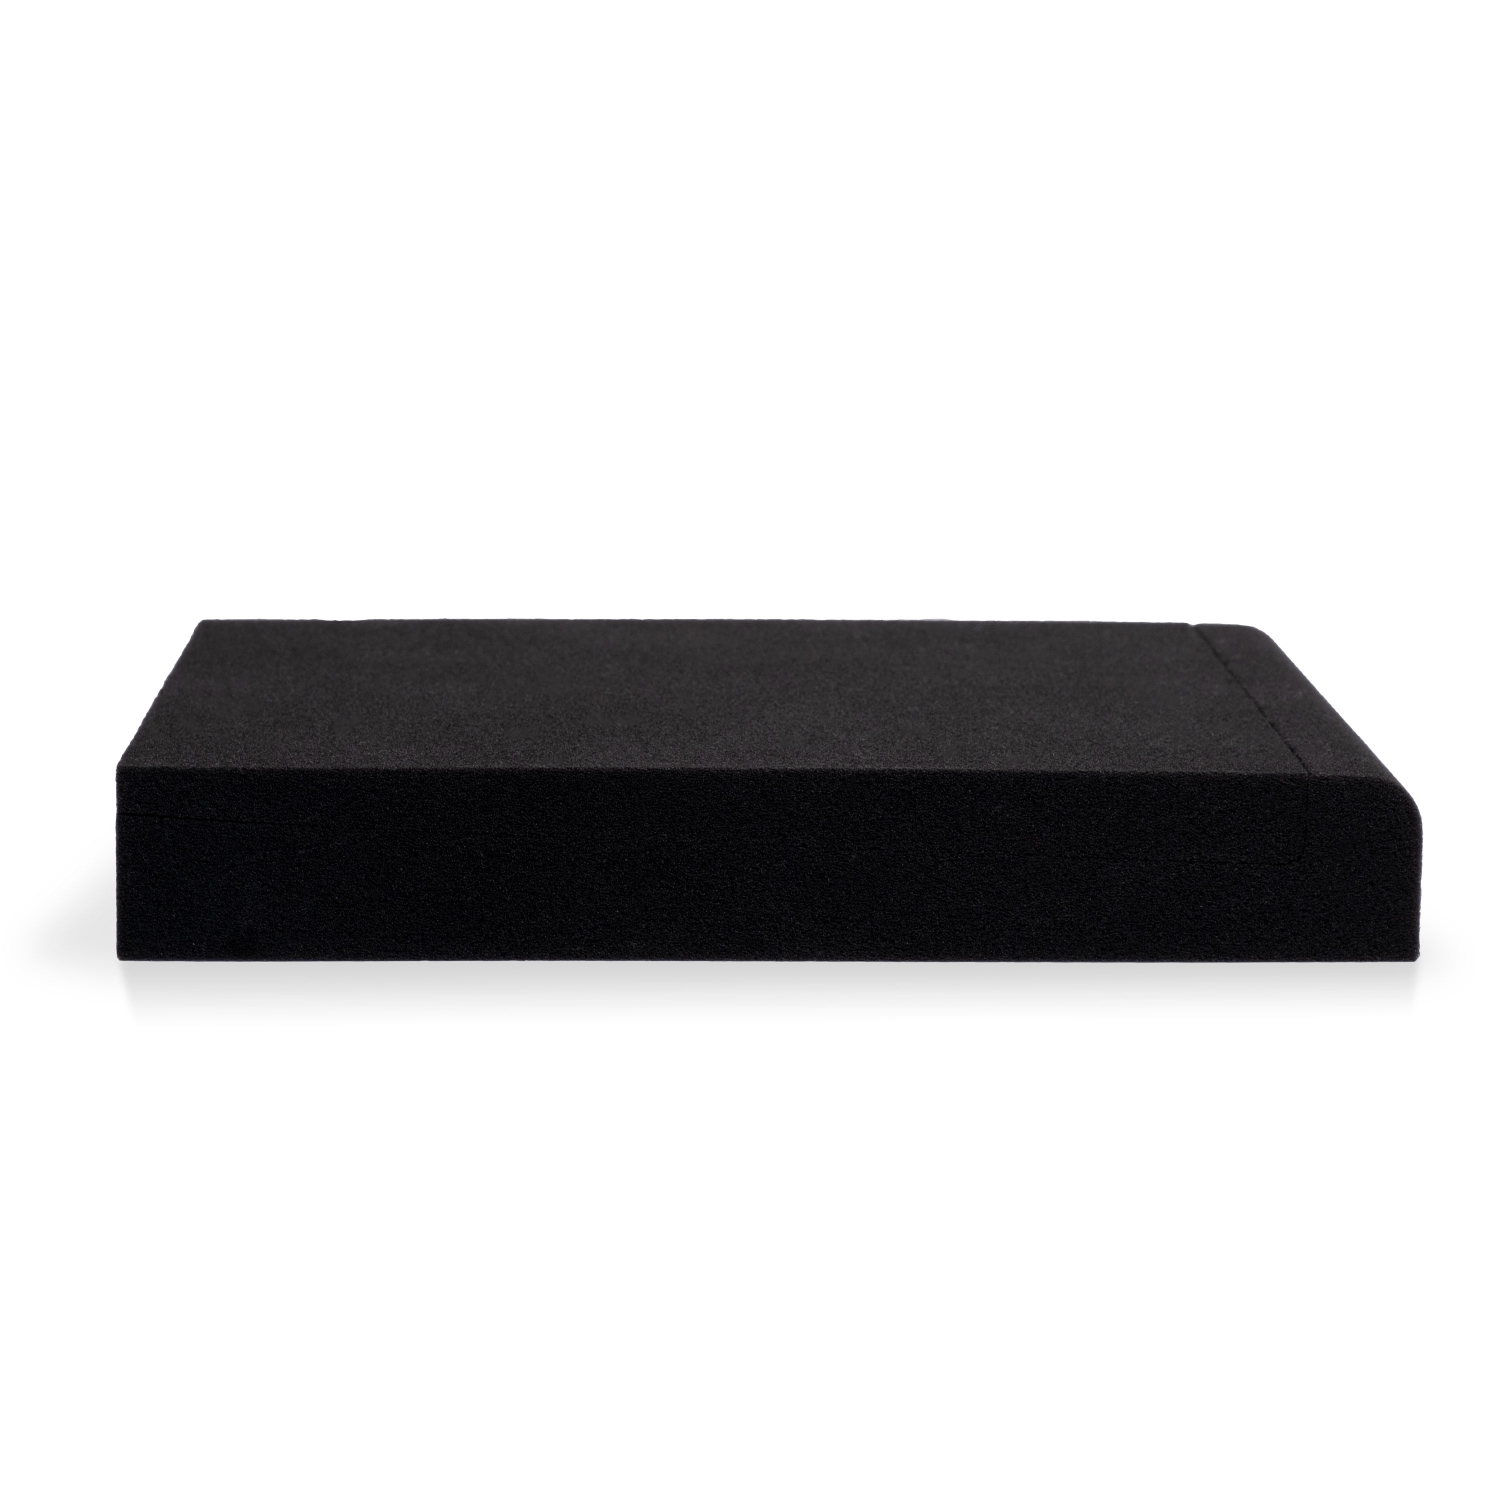  Fluance High Density Acoustic Foam Isolation Pads for